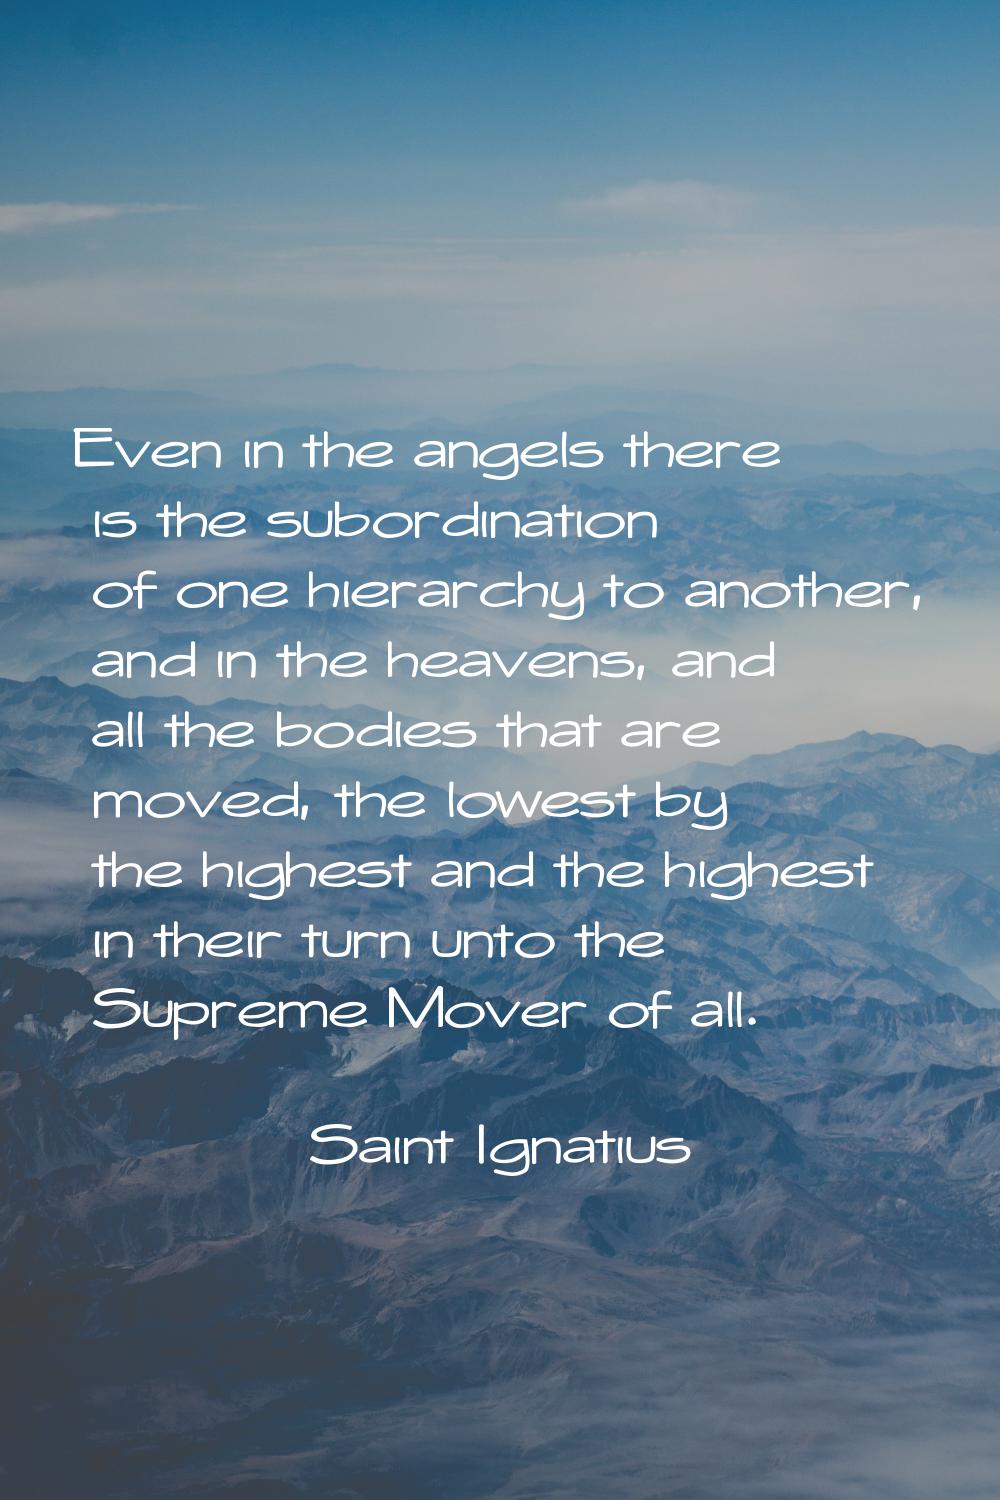 Even in the angels there is the subordination of one hierarchy to another, and in the heavens, and 